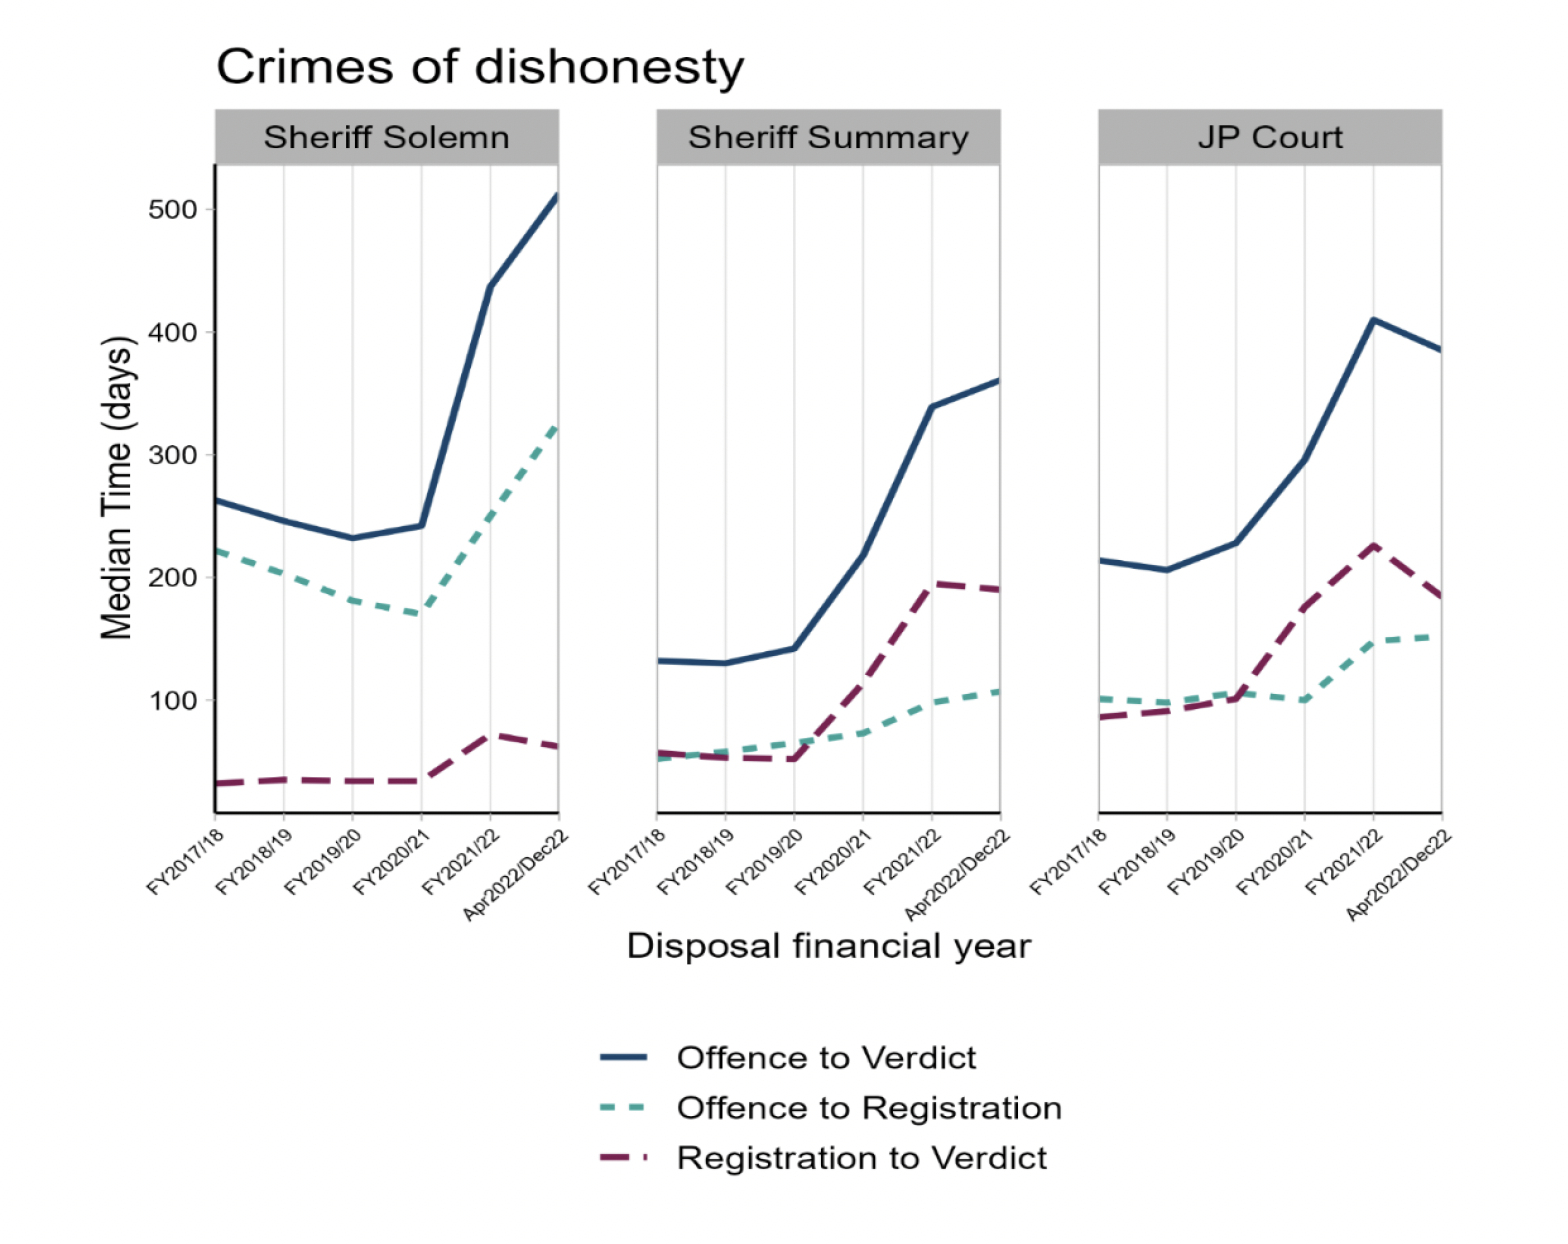 Figure 10: Three line charts showing offence to verdict, offence to registration and registration to verdict median times for accused with crimes of dishonesty in Sheriff Solemn, Sheriff Summary and JP Court showing that all times have increased since the beginning of COVID-19 pandemic.